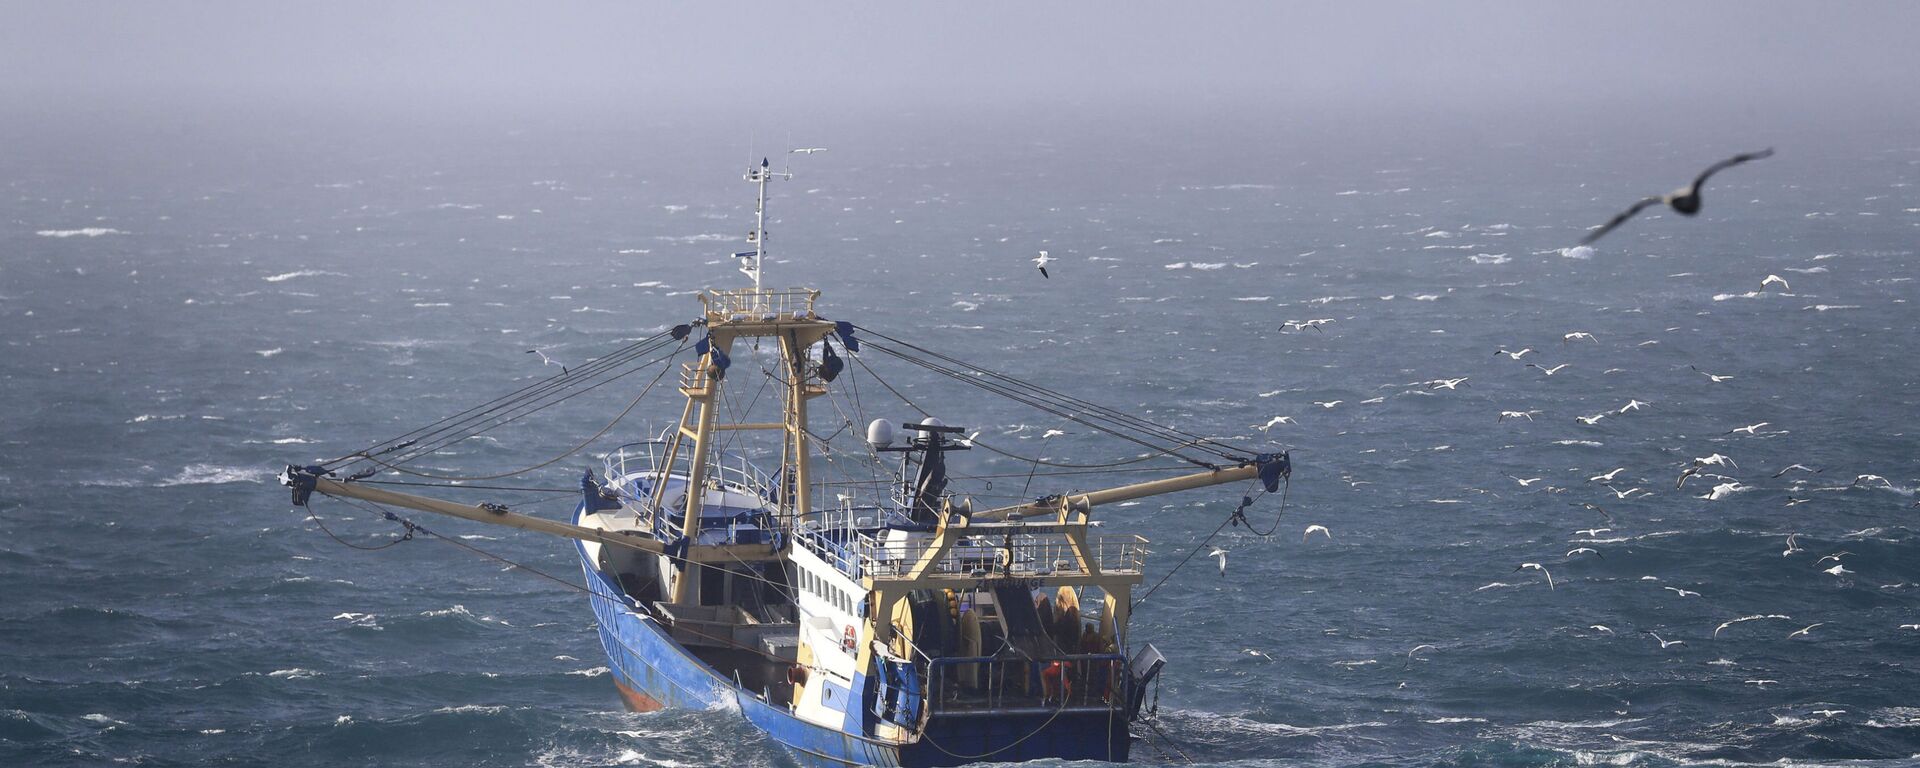 A fishing boat at work in the English Channel, off the southern coast of England, Saturday Feb. 1, 2020. The fishing industry is predicted to be one of the main subjects for negotiations between the UK and Europe, after the UK left the European Union on Friday. - Sputnik International, 1920, 30.10.2021